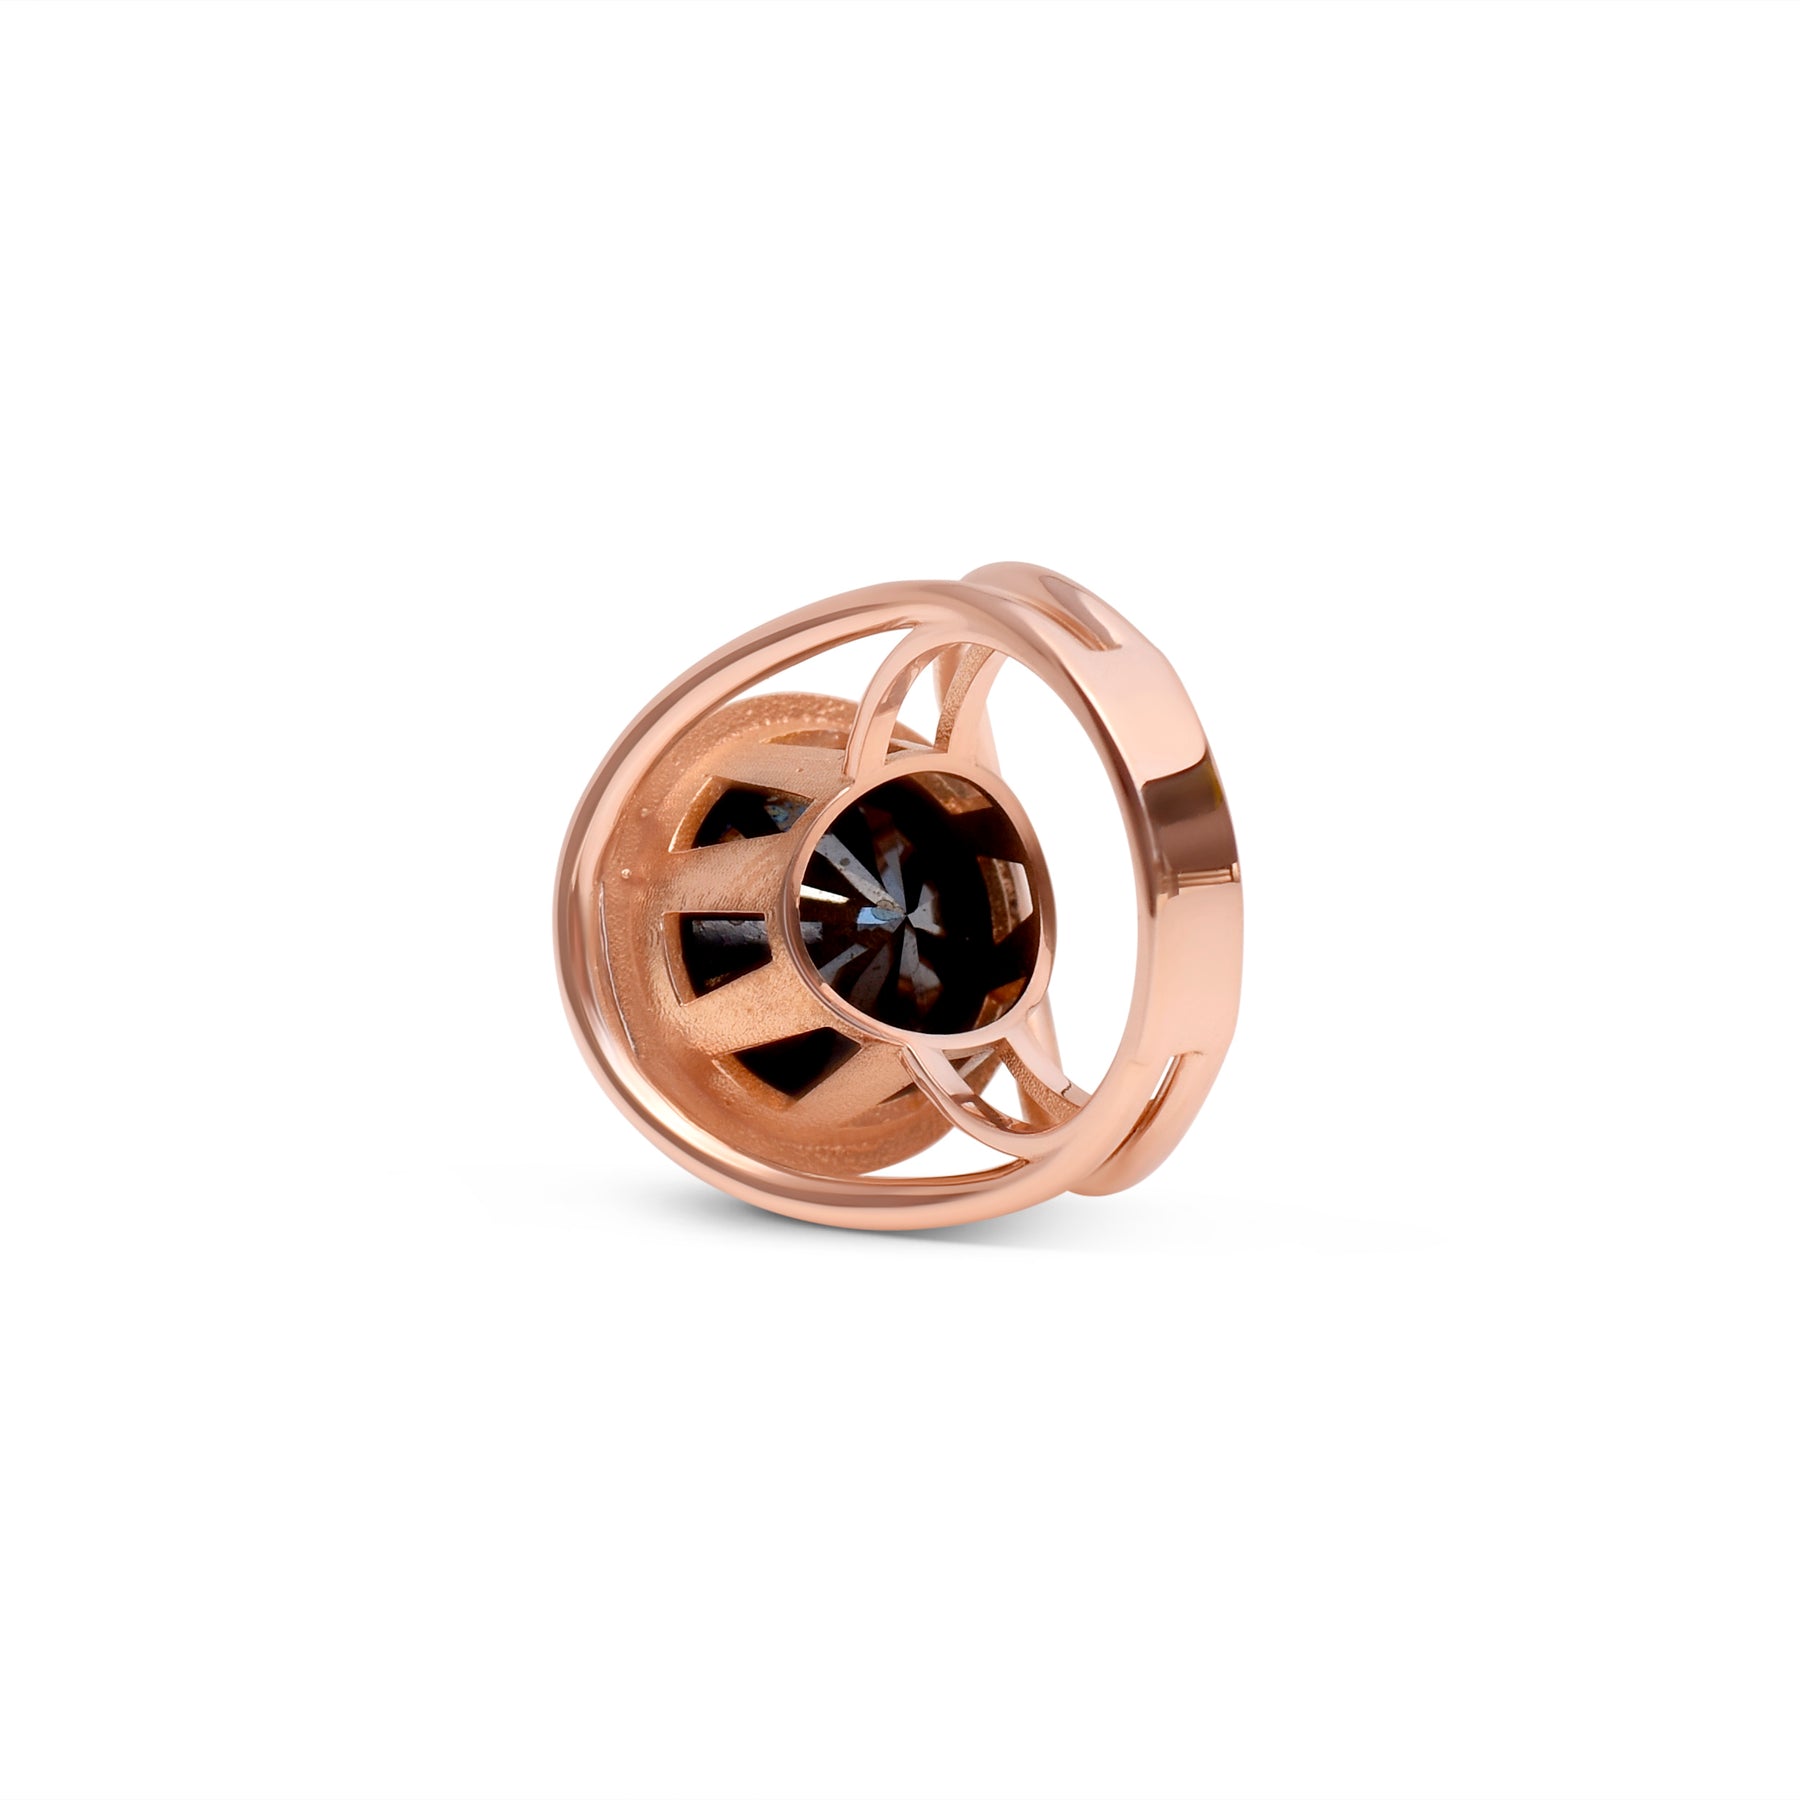 Black Diamond Ring - RED GOLD® Collection